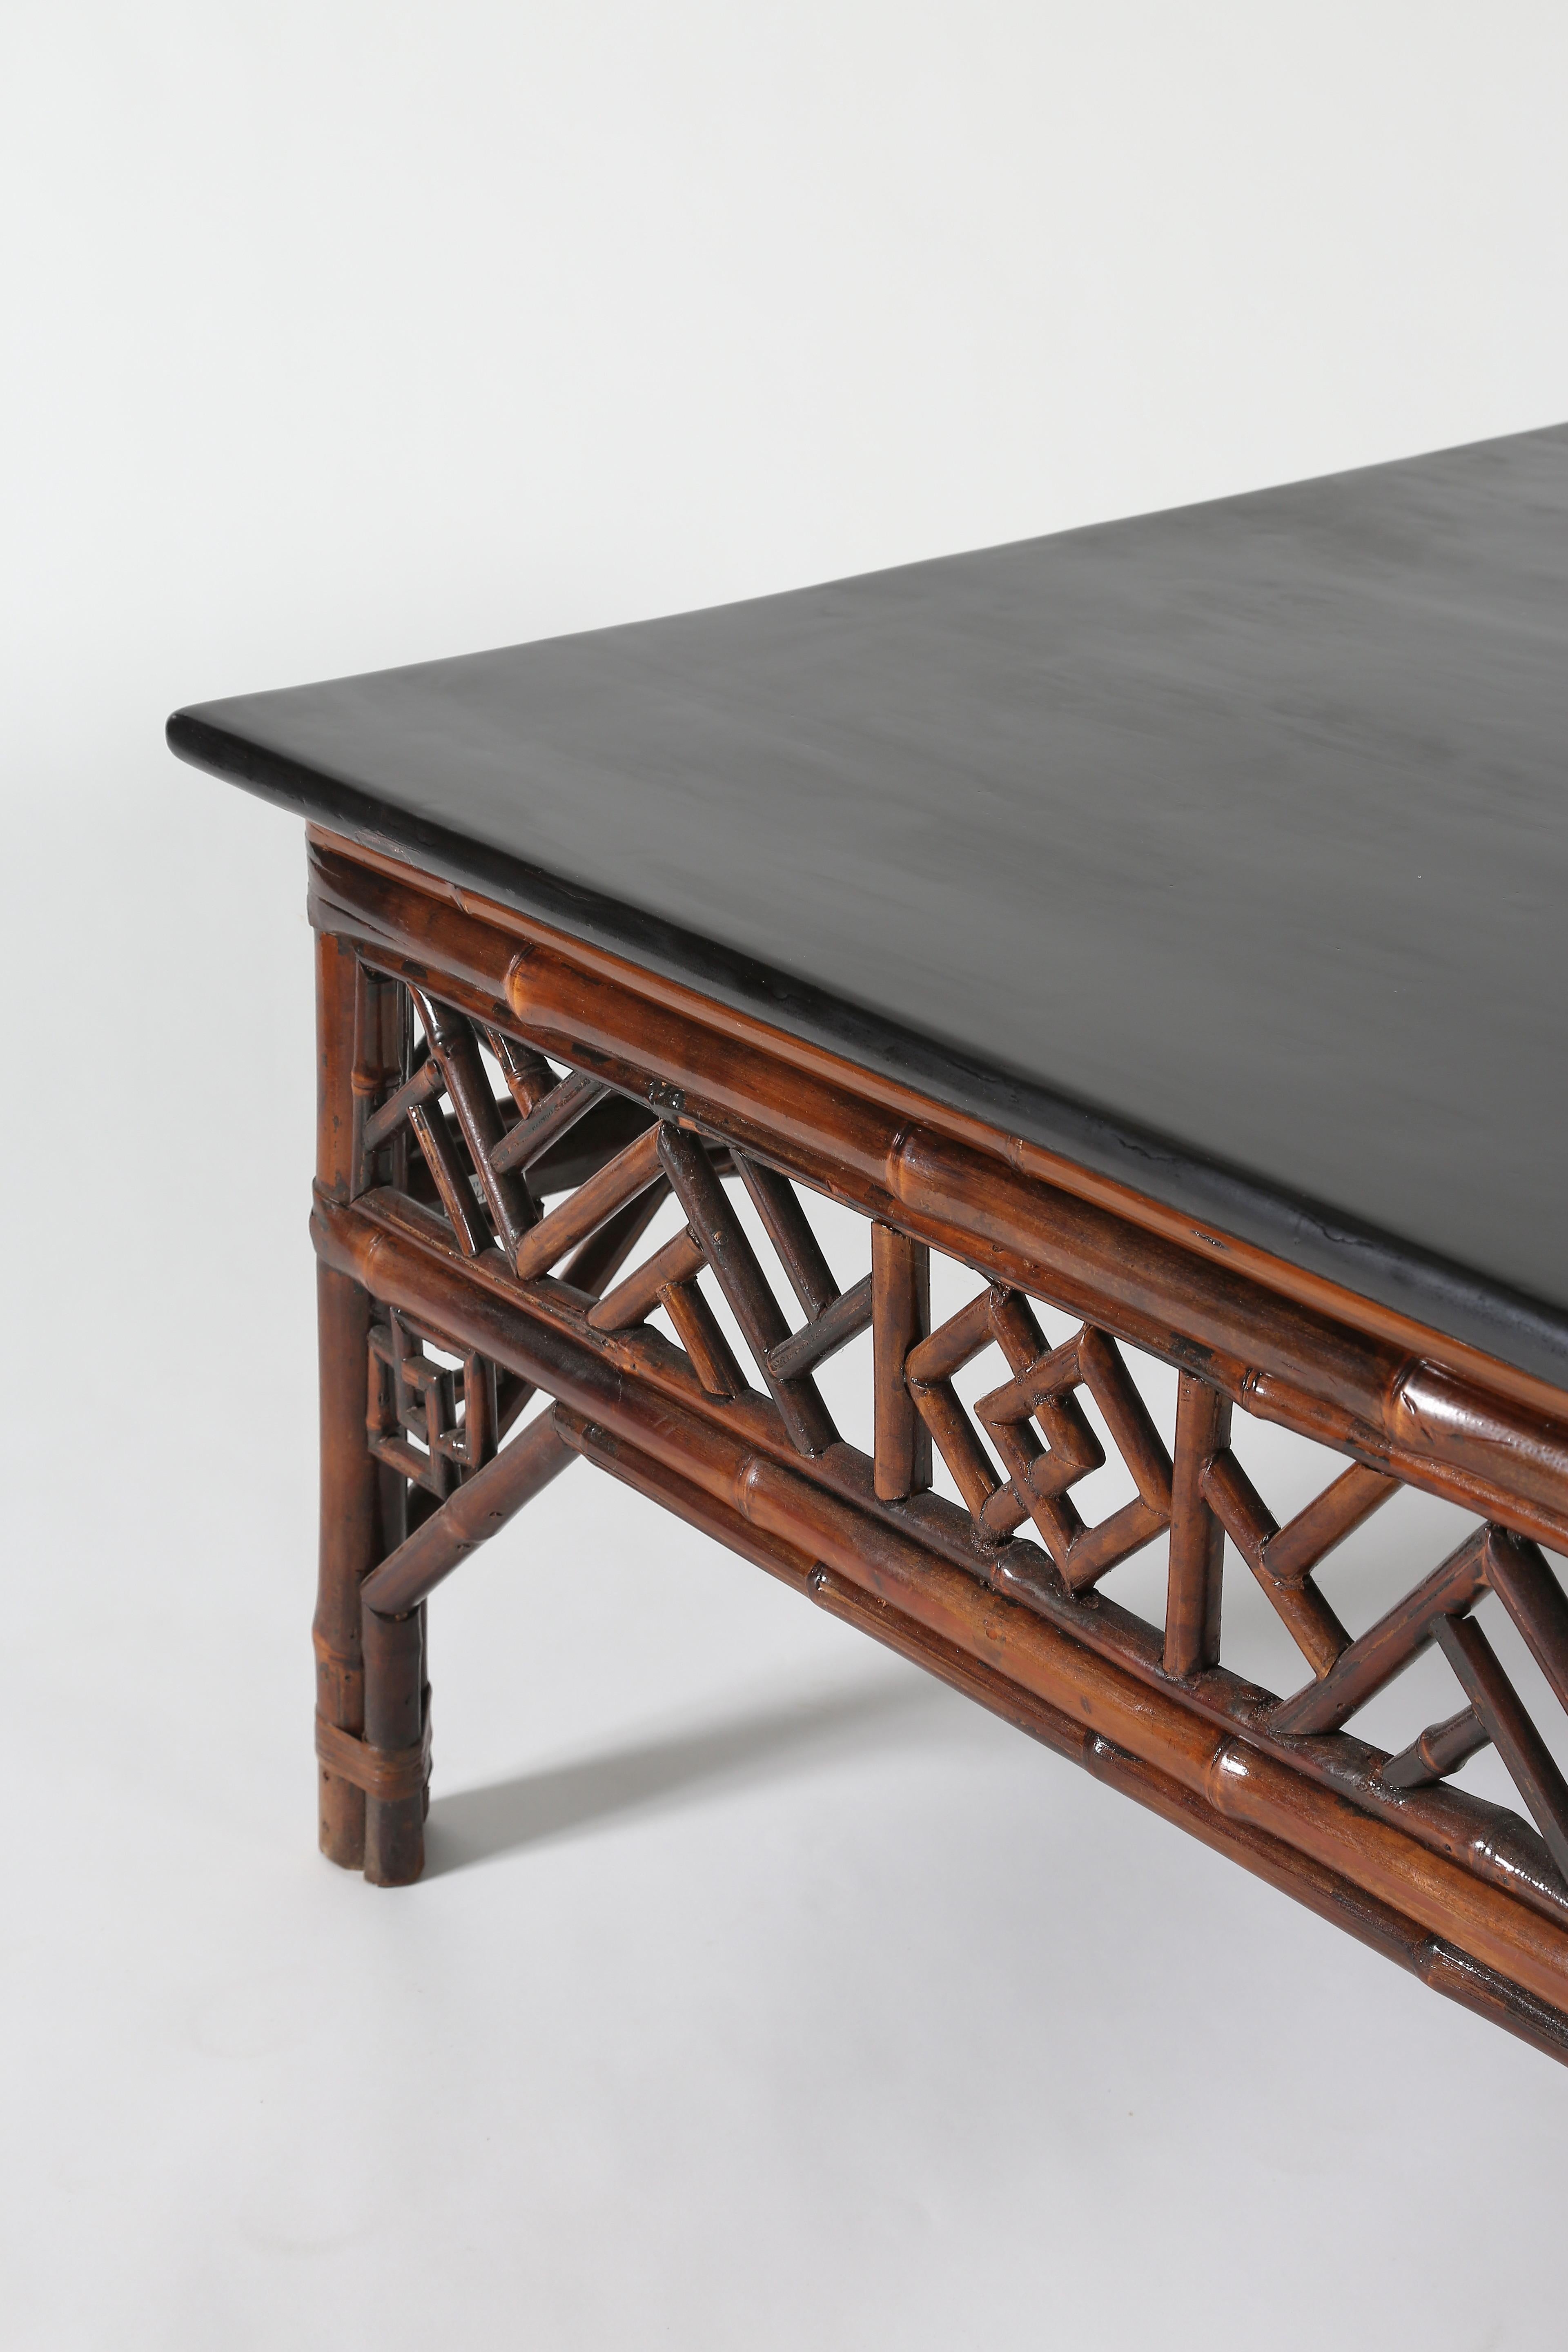 The black lacquer paneled top protruding over wrapped around stretchers, enclosing lattice panels , all standing on straight bamboo legs reinforced by arch apron with reticulated spandrels

Bamboo and black lacquer over wood
Shanxi Province,